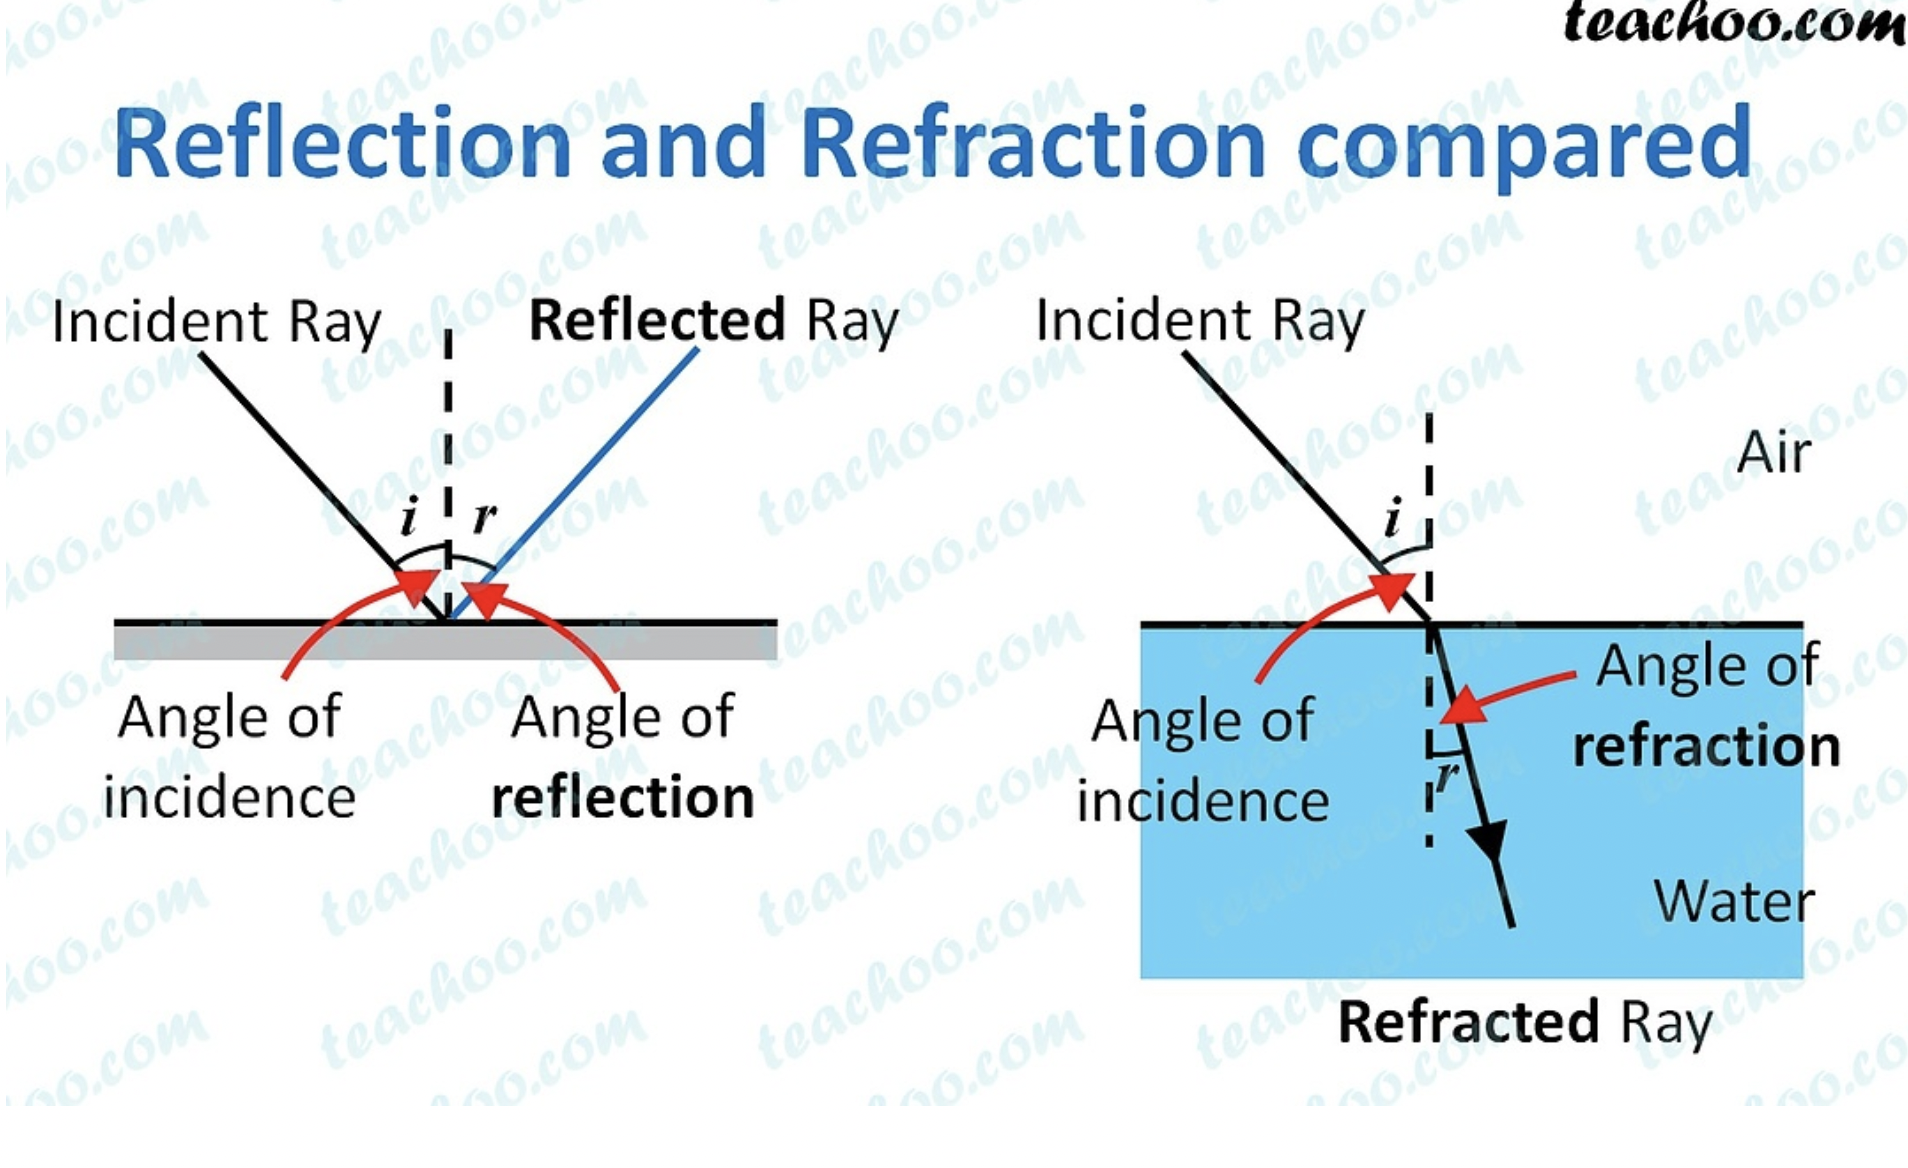 <p>\n An incident ray refers to a ray of light that is approaching or striking a surface or interface between two different mediums. It is the ray of light that is incident or incoming onto the boundary.</p>